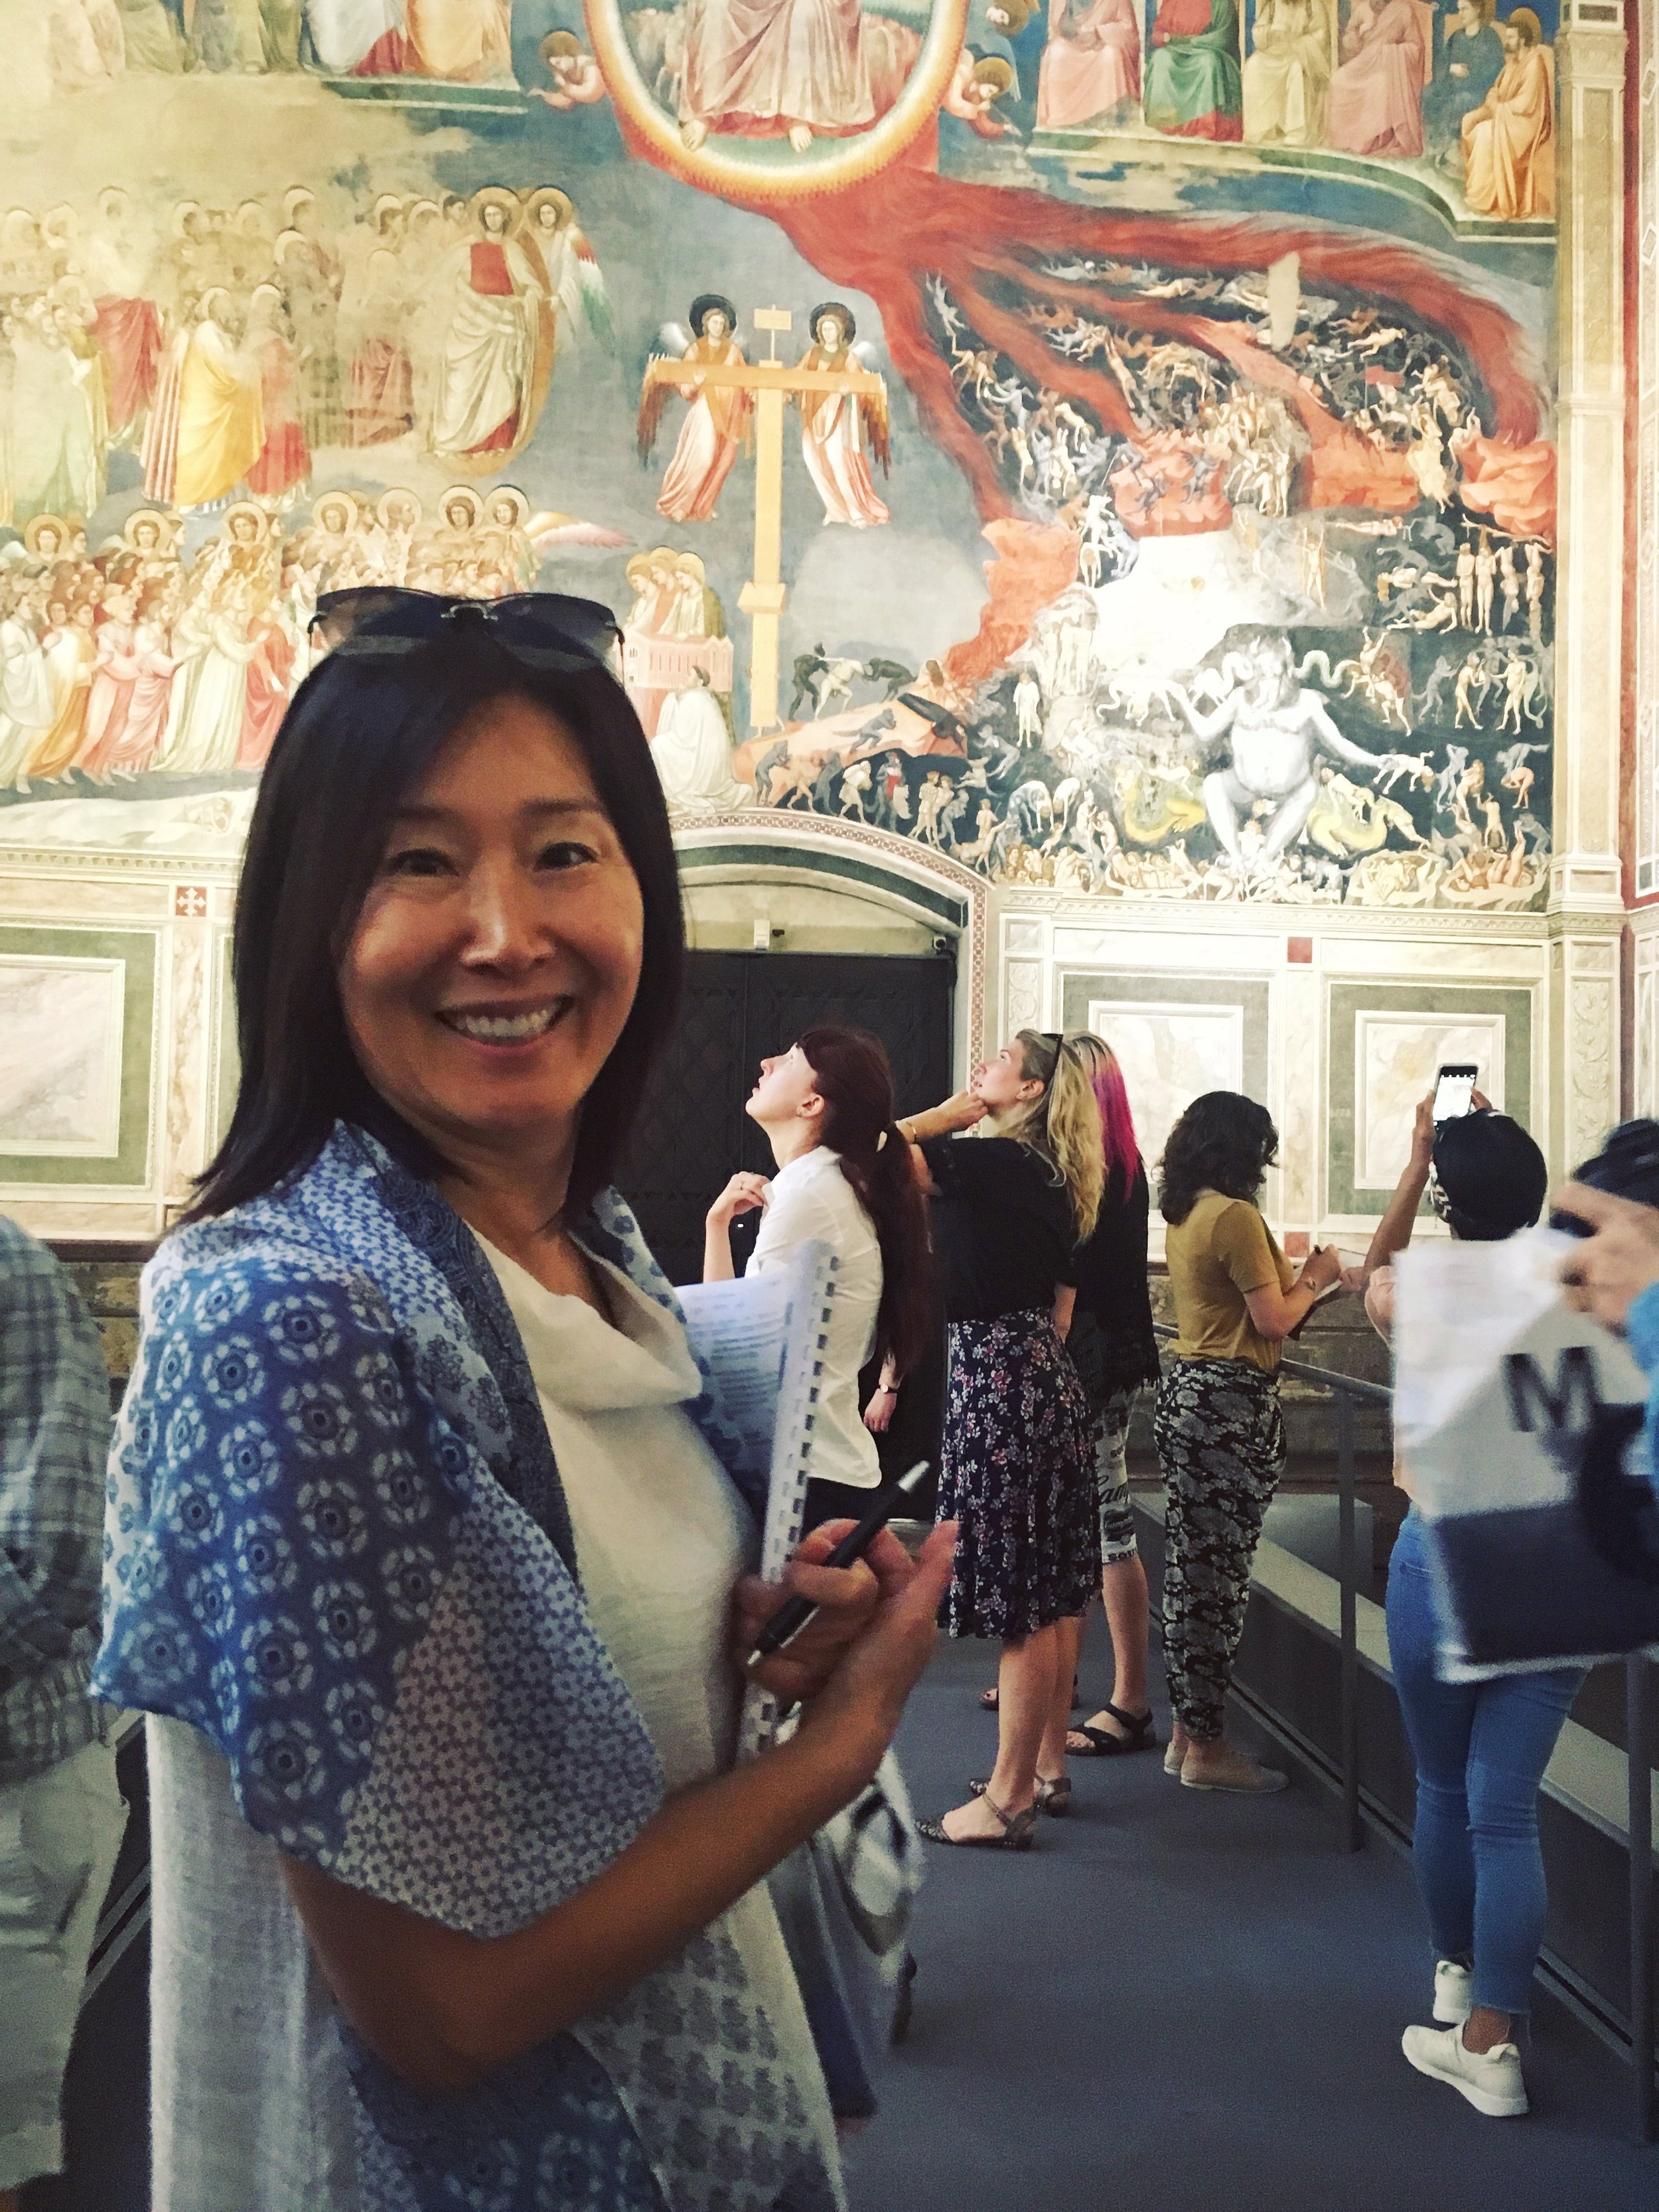 June Kim, undergraduate student of Painting, with Giotto's frescoes in the Scrovegni Chapel in Padua